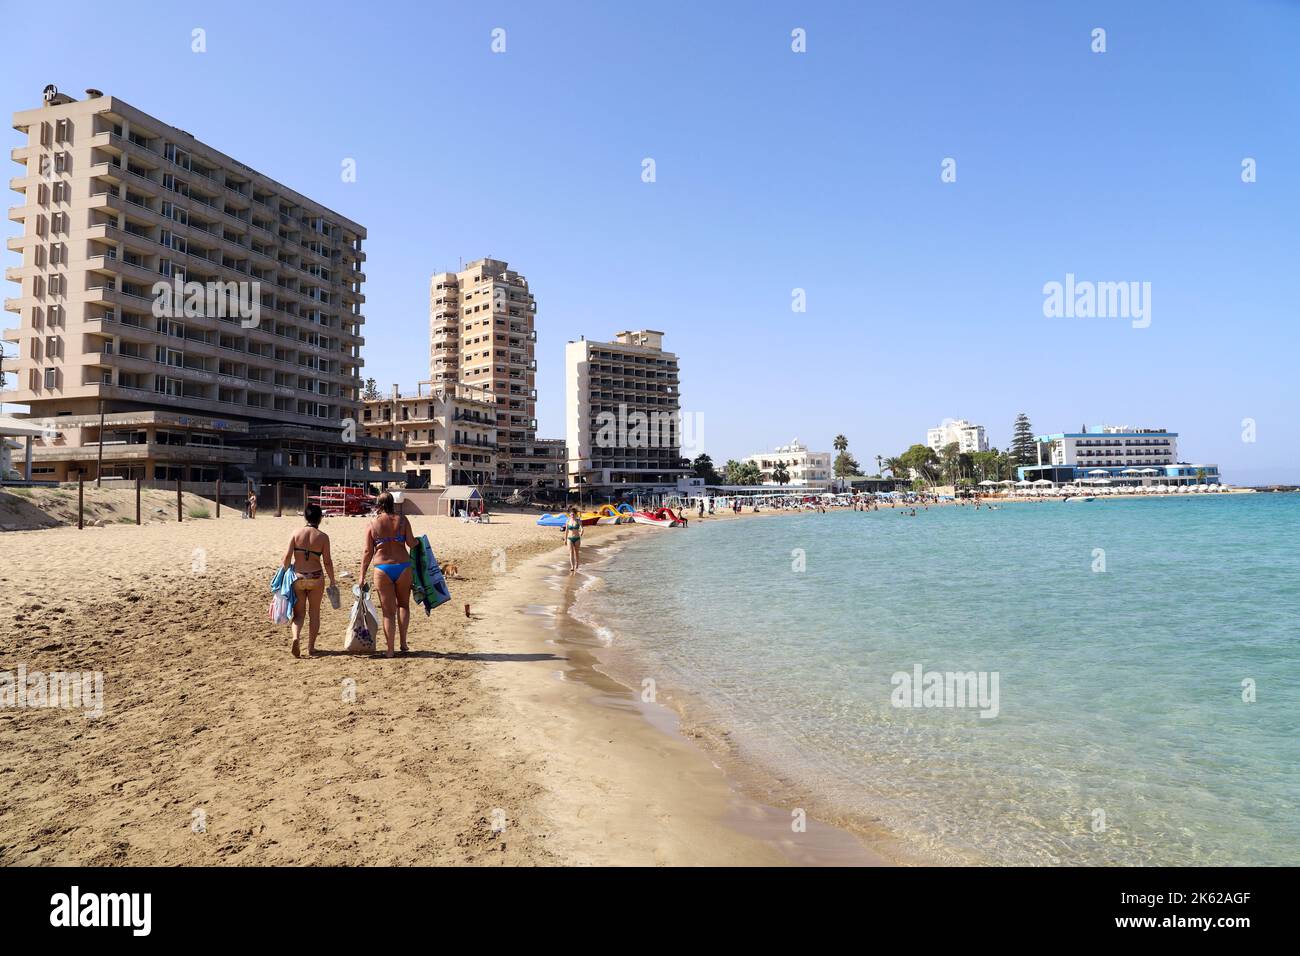 Tourists on Palm Beach next to Beachfront Hotels abandoned in 1974 when the Turkish Army invaded Northern Cyprus; Famagusta (Gazimagusa); Cyprus Stock Photo